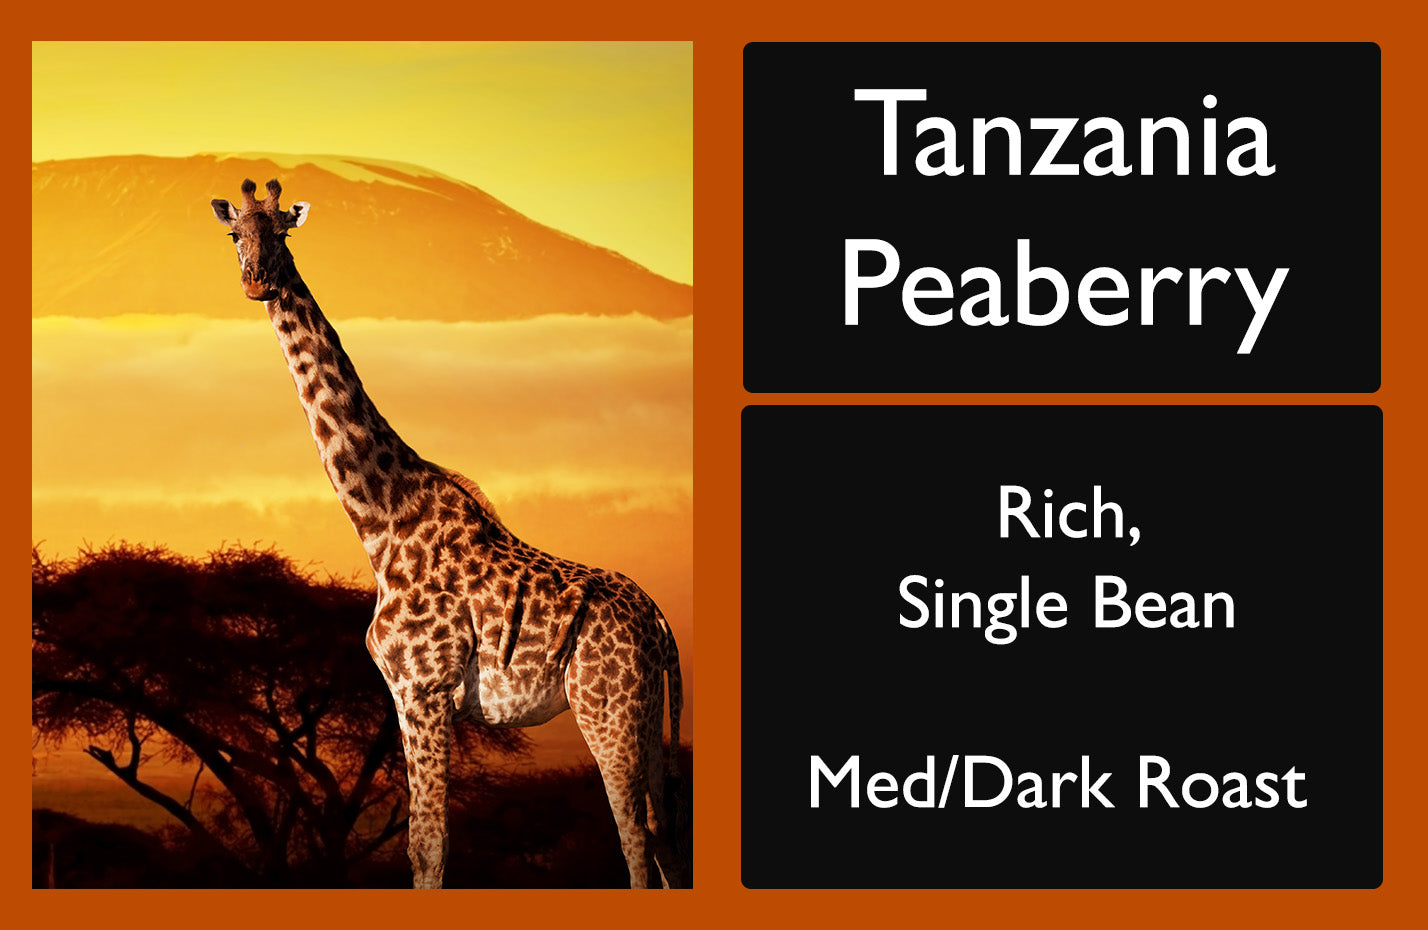 Picture of a bag of Tanzania Peaberry Coffee